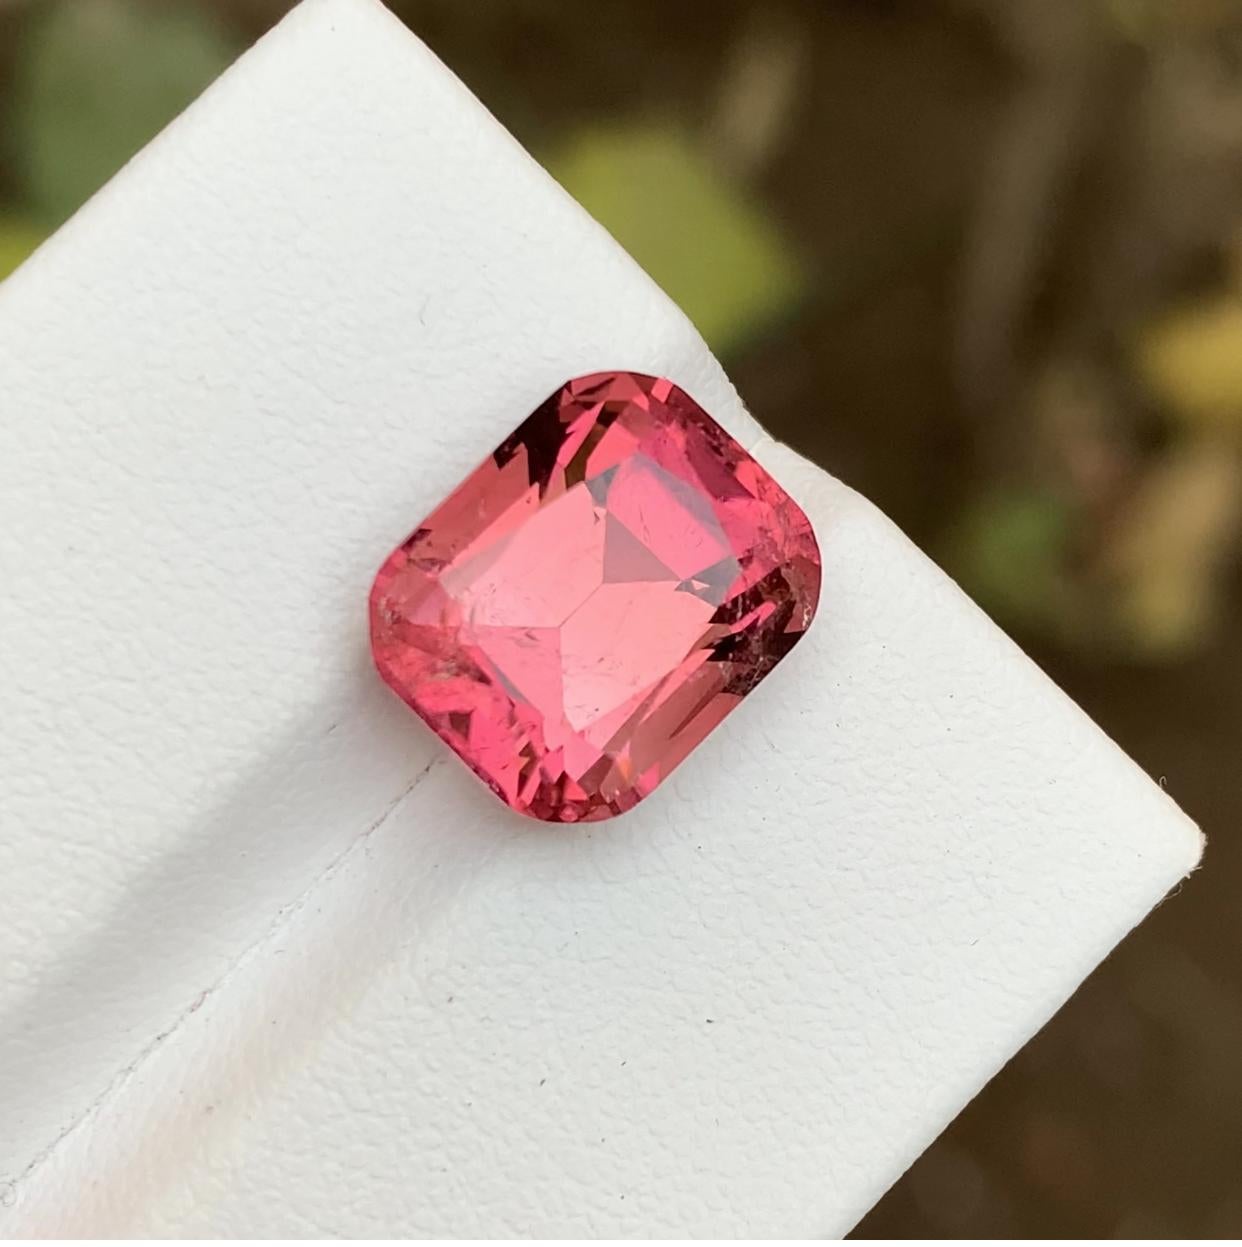 GEMSTONE TYPE: Tourmaline
PIECE(S): 1
WEIGHT: 7.25 Carats
SHAPE: Cushion
SIZE (MM):  11.77 x 9.81 x 8.27
COLOR: Peachy Pink
CLARITY: Slightly Included 
TREATMENT: Heated
ORIGIN: Afghanistan 🇦🇫 
CERTIFICATE: On demand

This stunning peachy pink